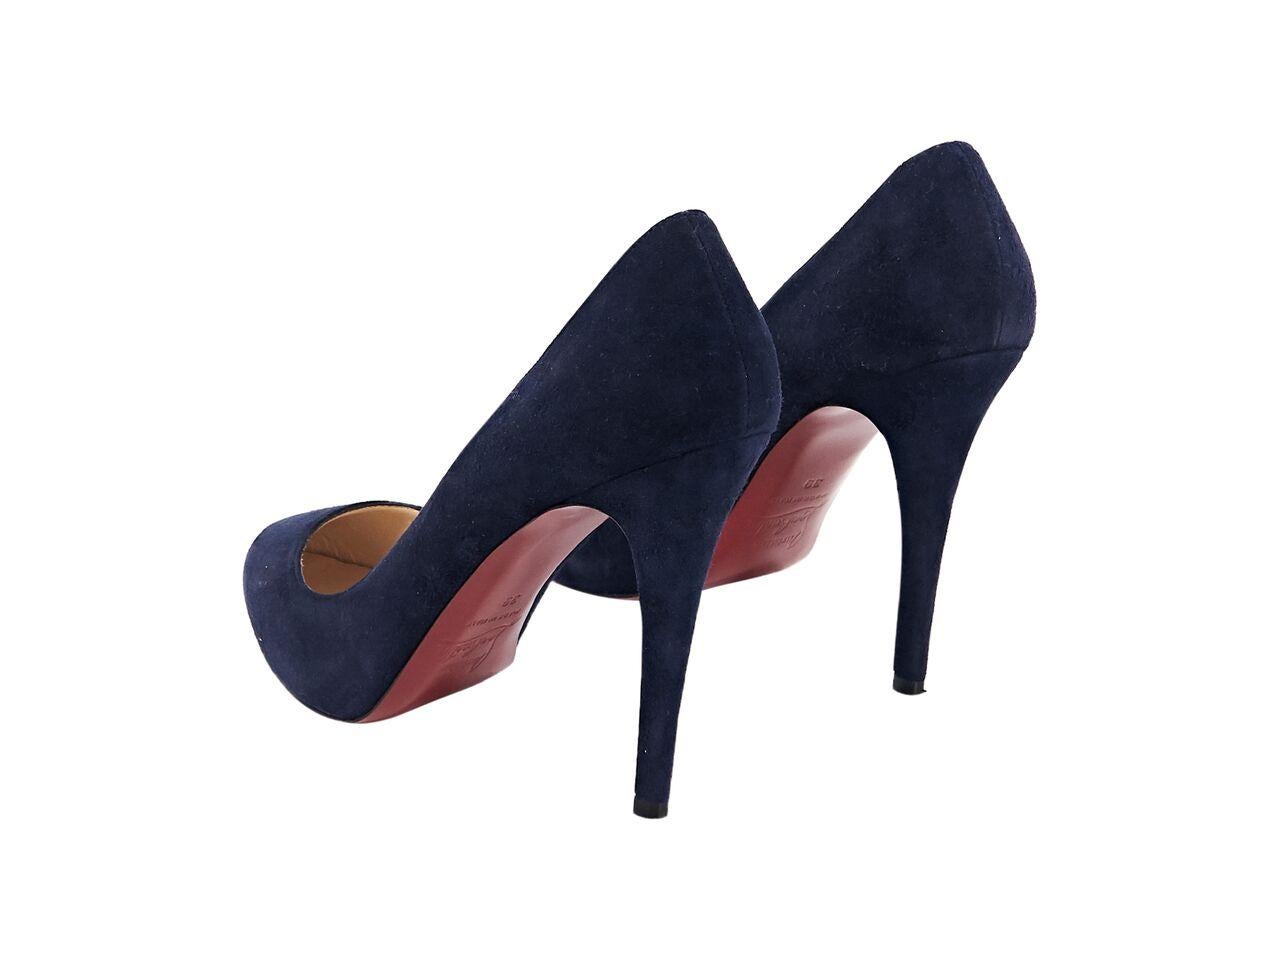 Product details:  Navy blue suede pumps by Christian Louboutin.  Round almond toe.  Iconic red sole.  Slip-on style.  4.5